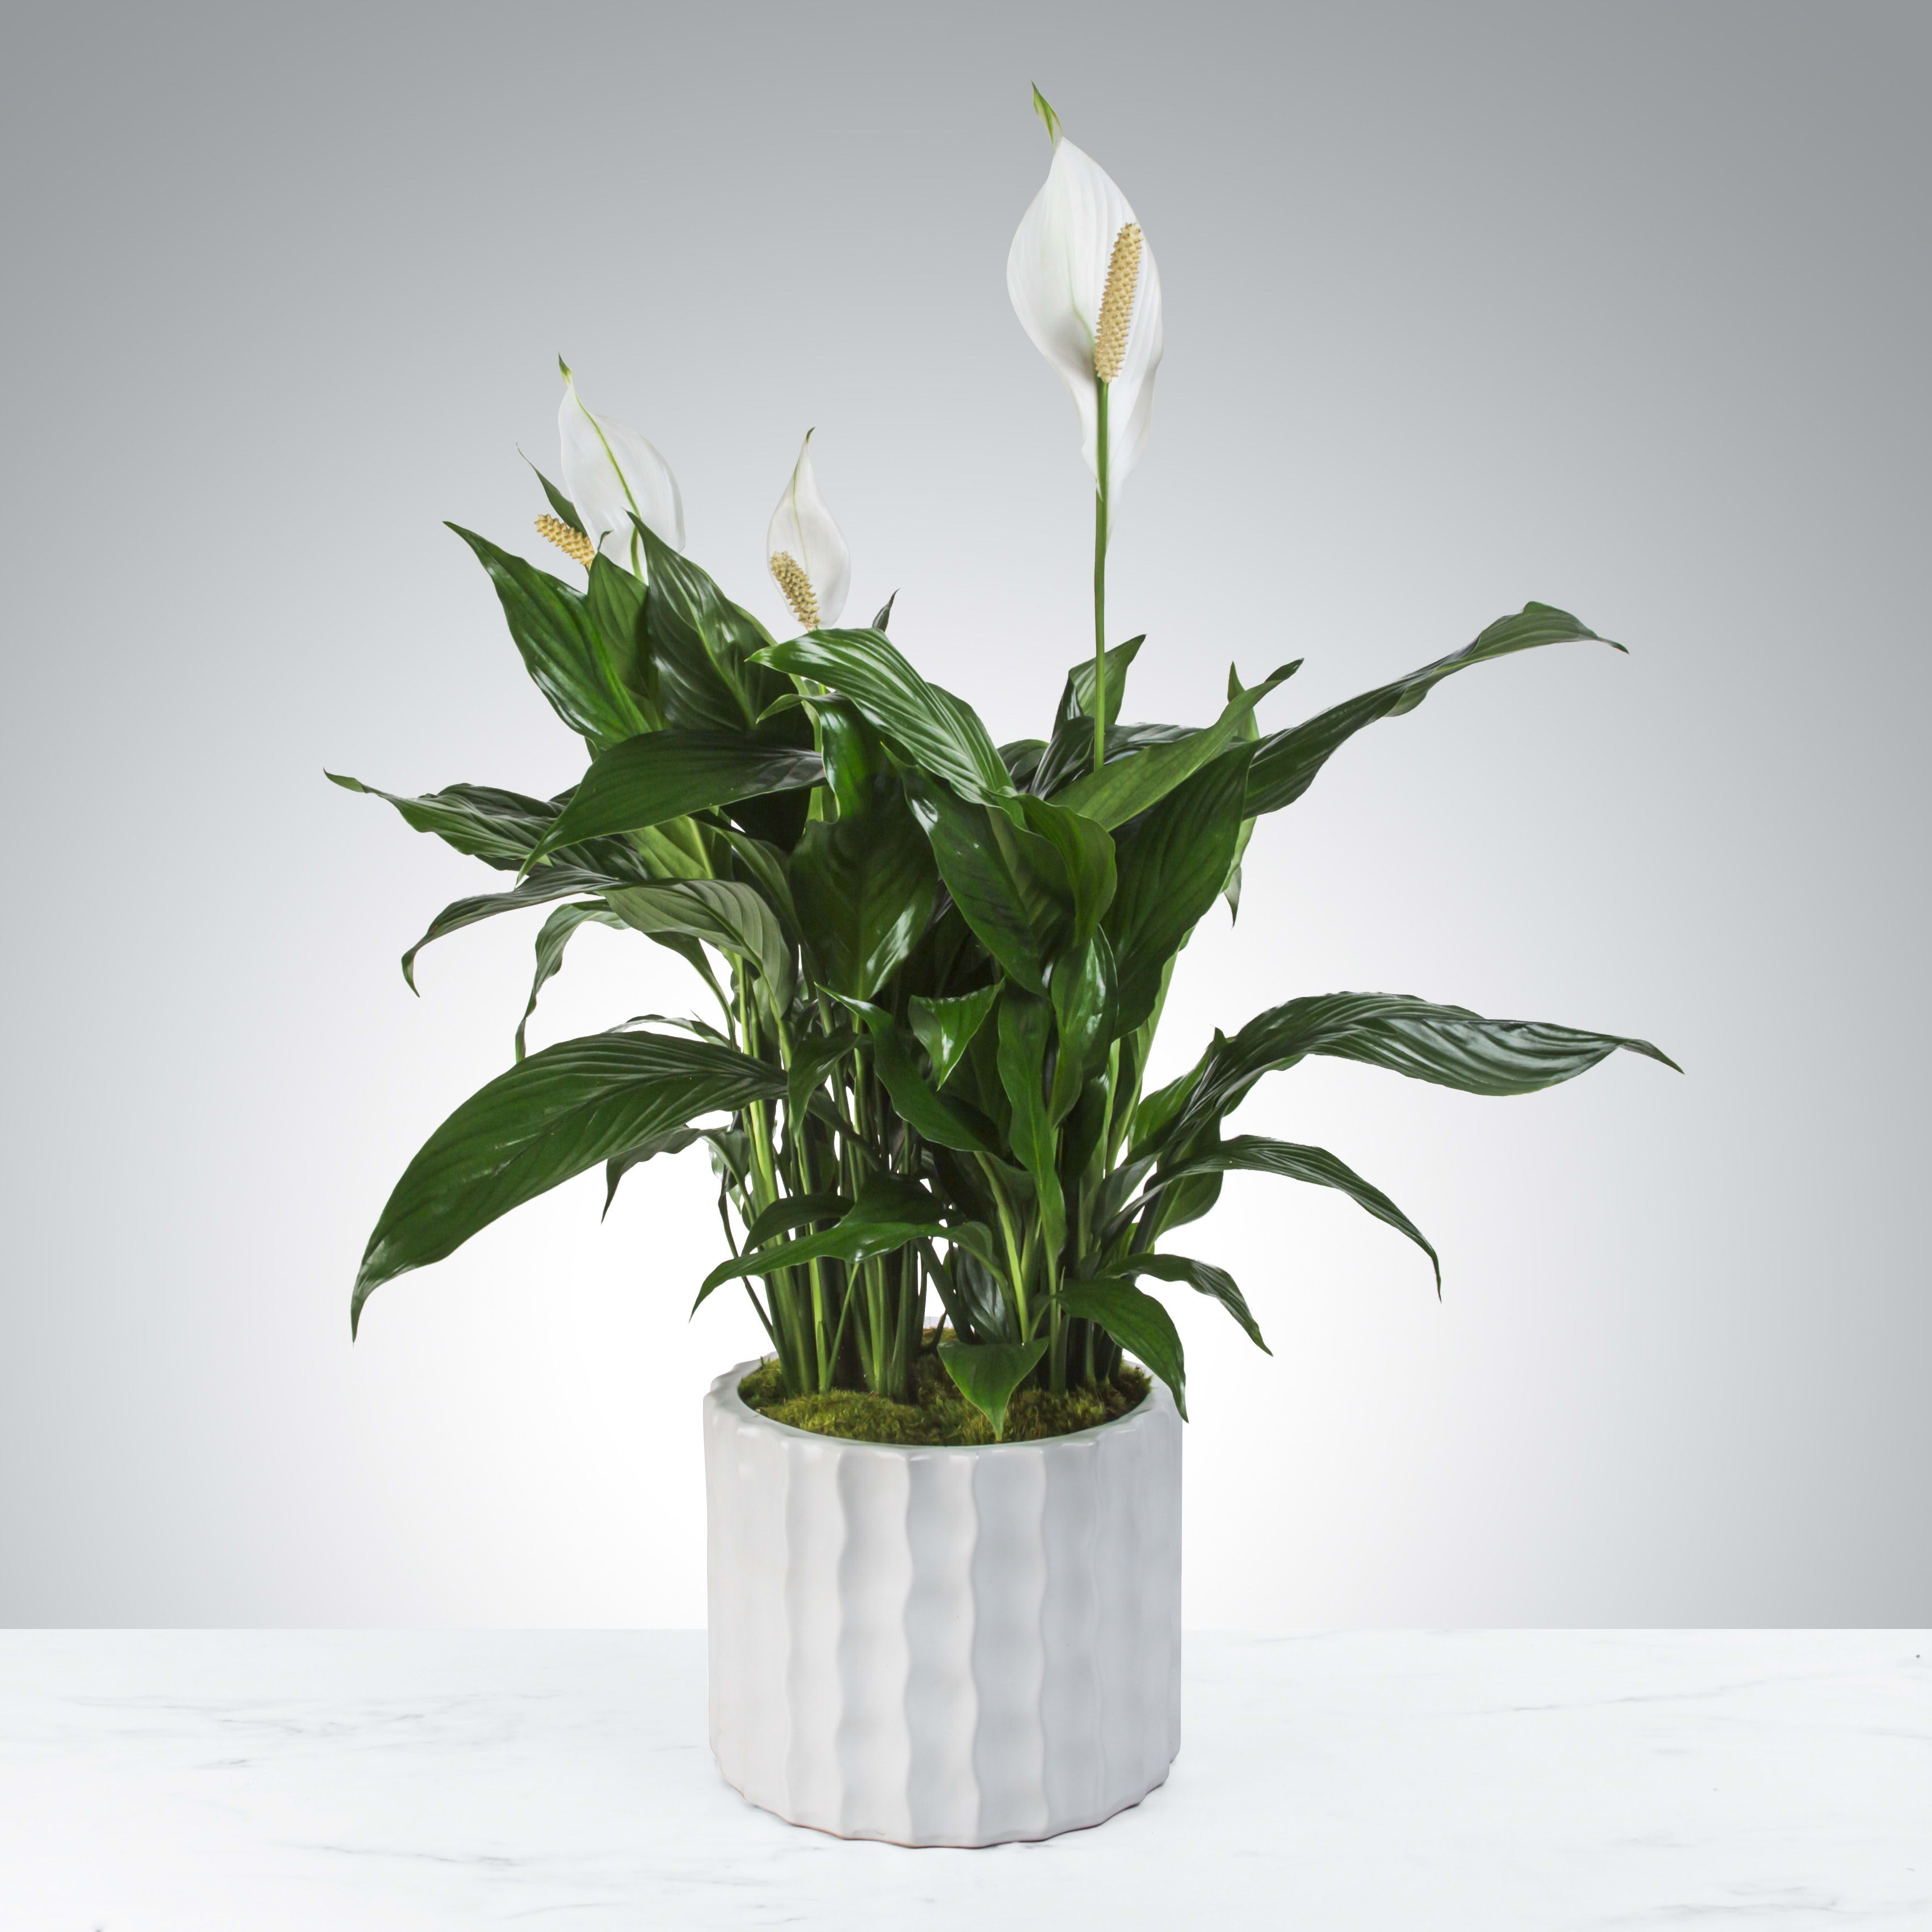 EC74 - Modern Spathiphyllum Plant  - A tall reaching spathiphyllum plant, also known as a peace lily, set in a modern planter. The Peace Lily is the perfect choice for anyone looking for a stylish and low-maintenance indoor plant. Its elegant green leaves and white flowers make it a stylish addition to any home, office or event space. Peace Lily's are easy to grow and are known for their air toxin removing properties. Send the gift of greenery! 